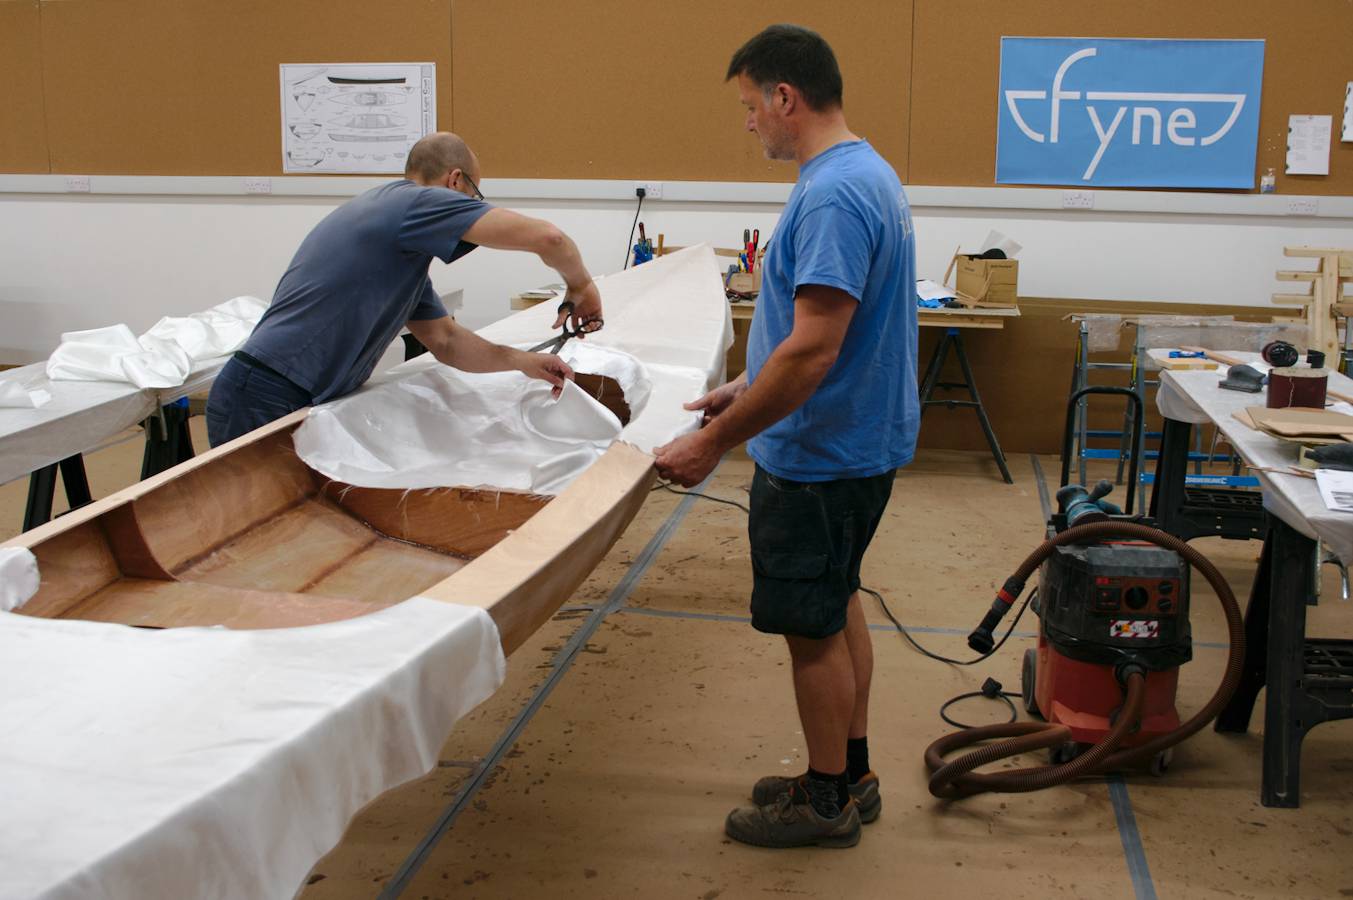 Fibreglassing the Expedition Wherry on a boatbuilding course at Fyne Boat Kits